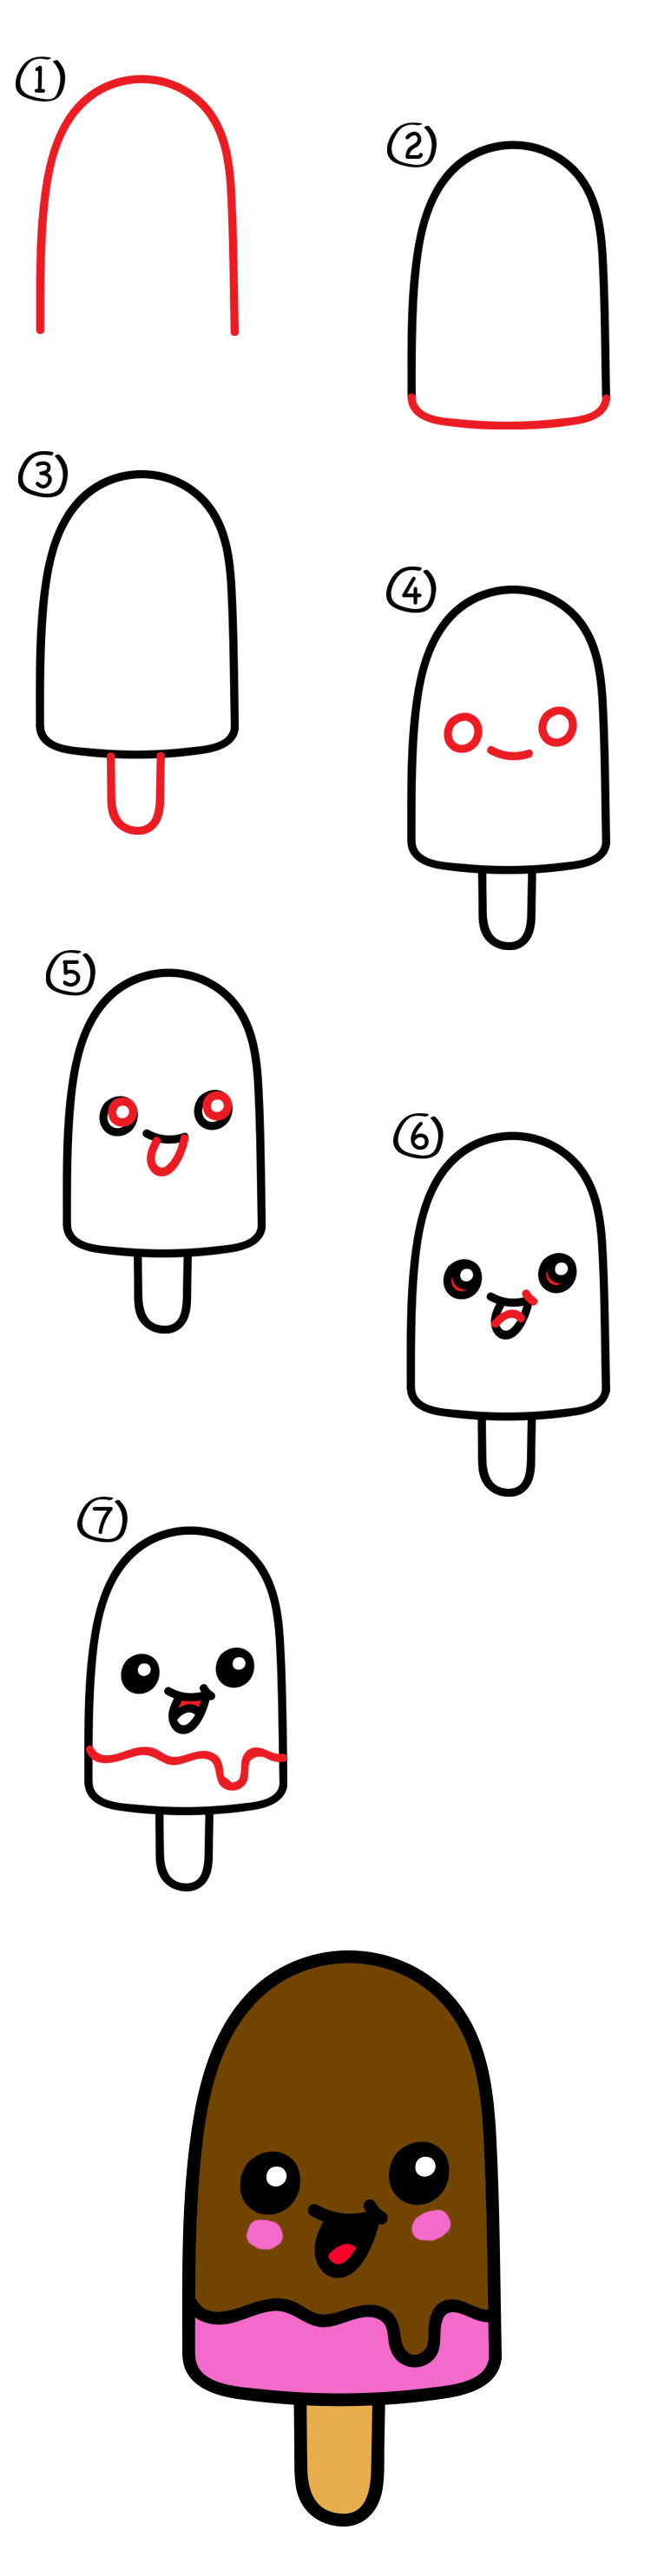 How To Draw A Cartoon Popsicle - Art For Kids Hub